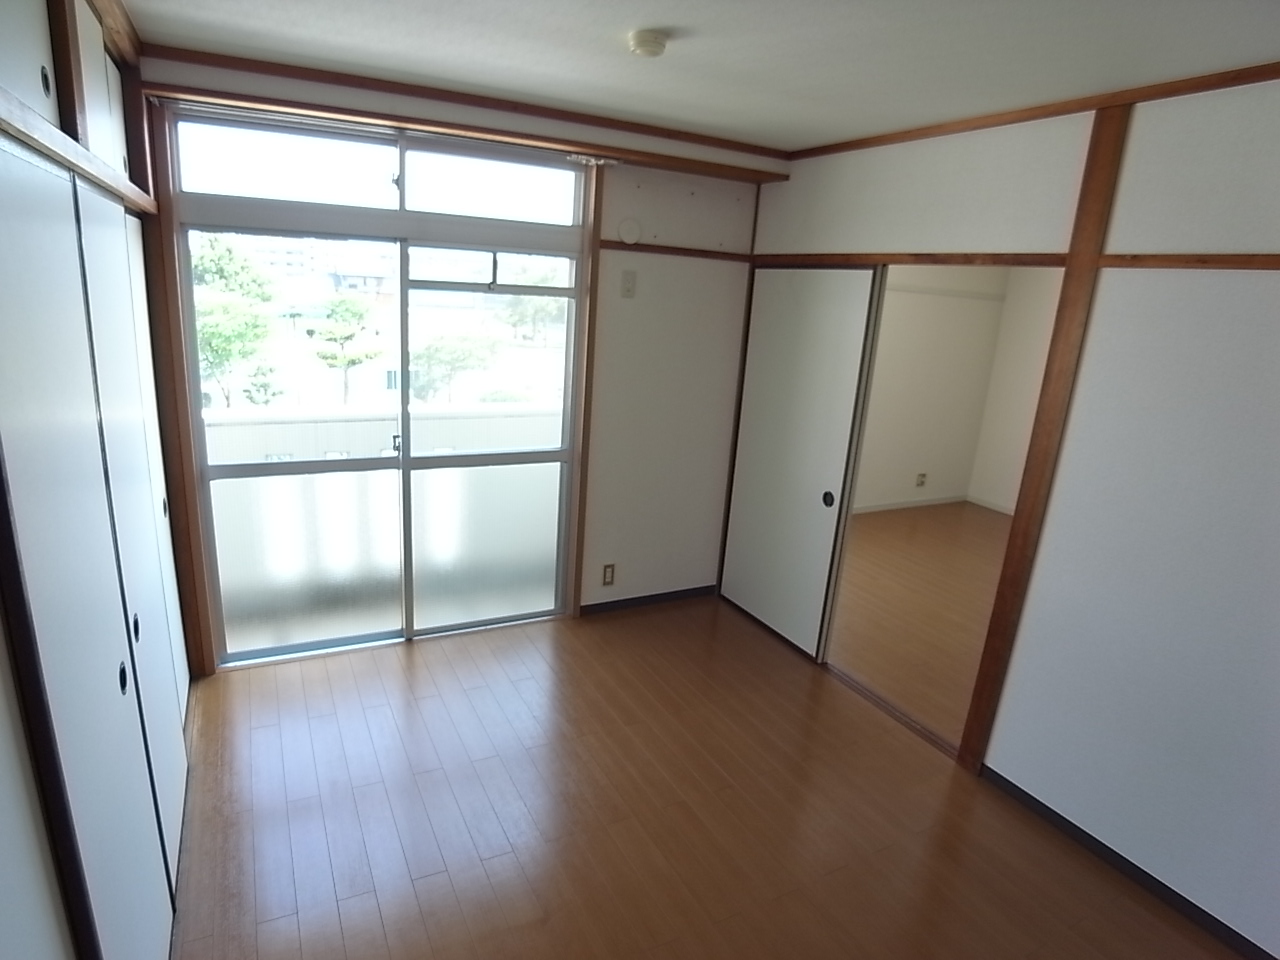 Other room space. South-facing bright Western-style